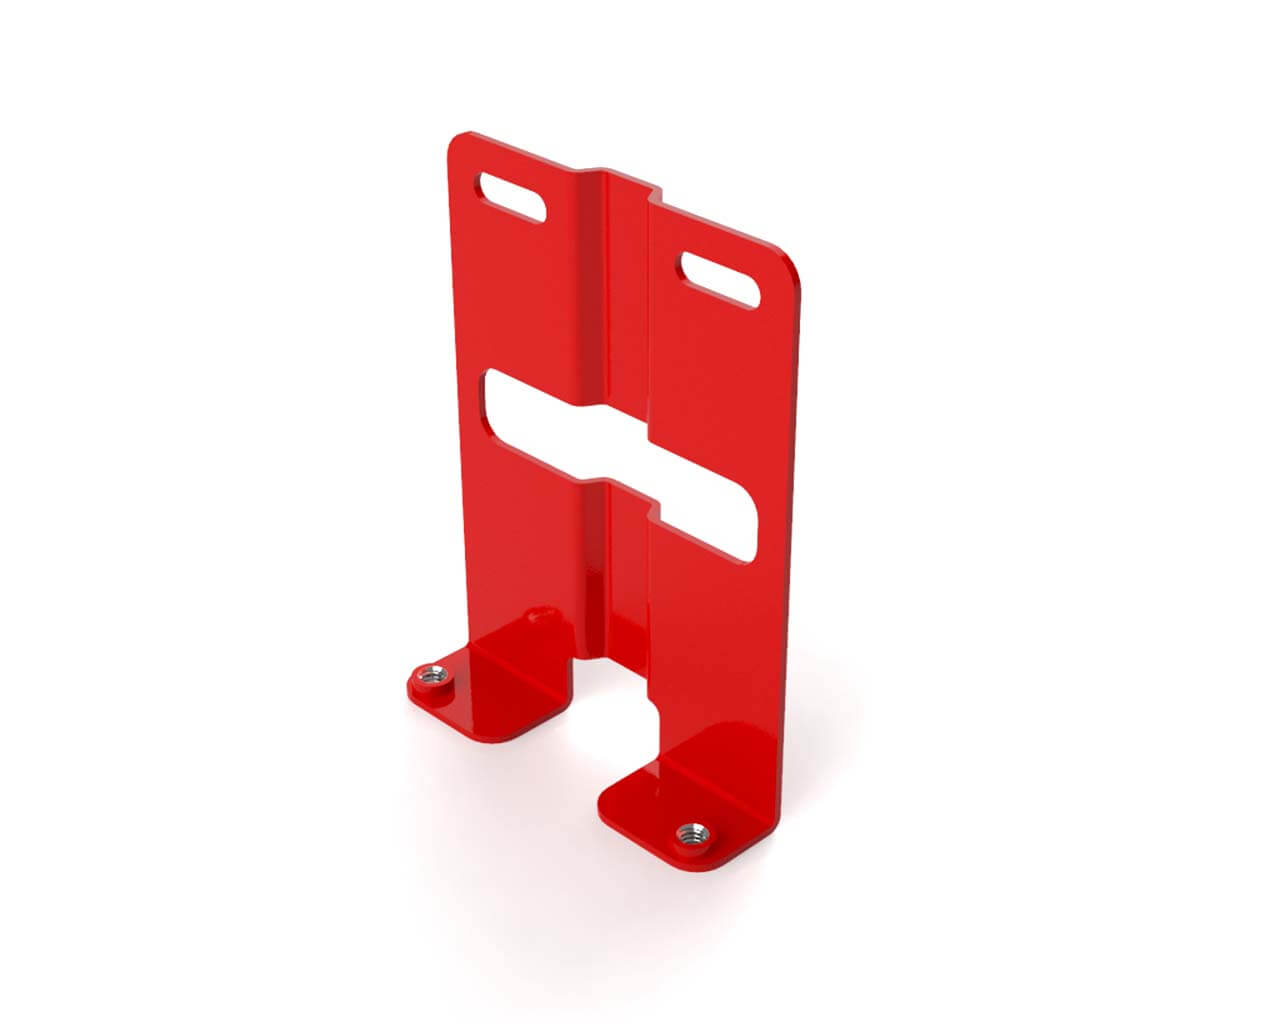 PrimoChill SX Upright CTR2 Mount Bracket - PrimoChill - KEEPING IT COOL UV Red